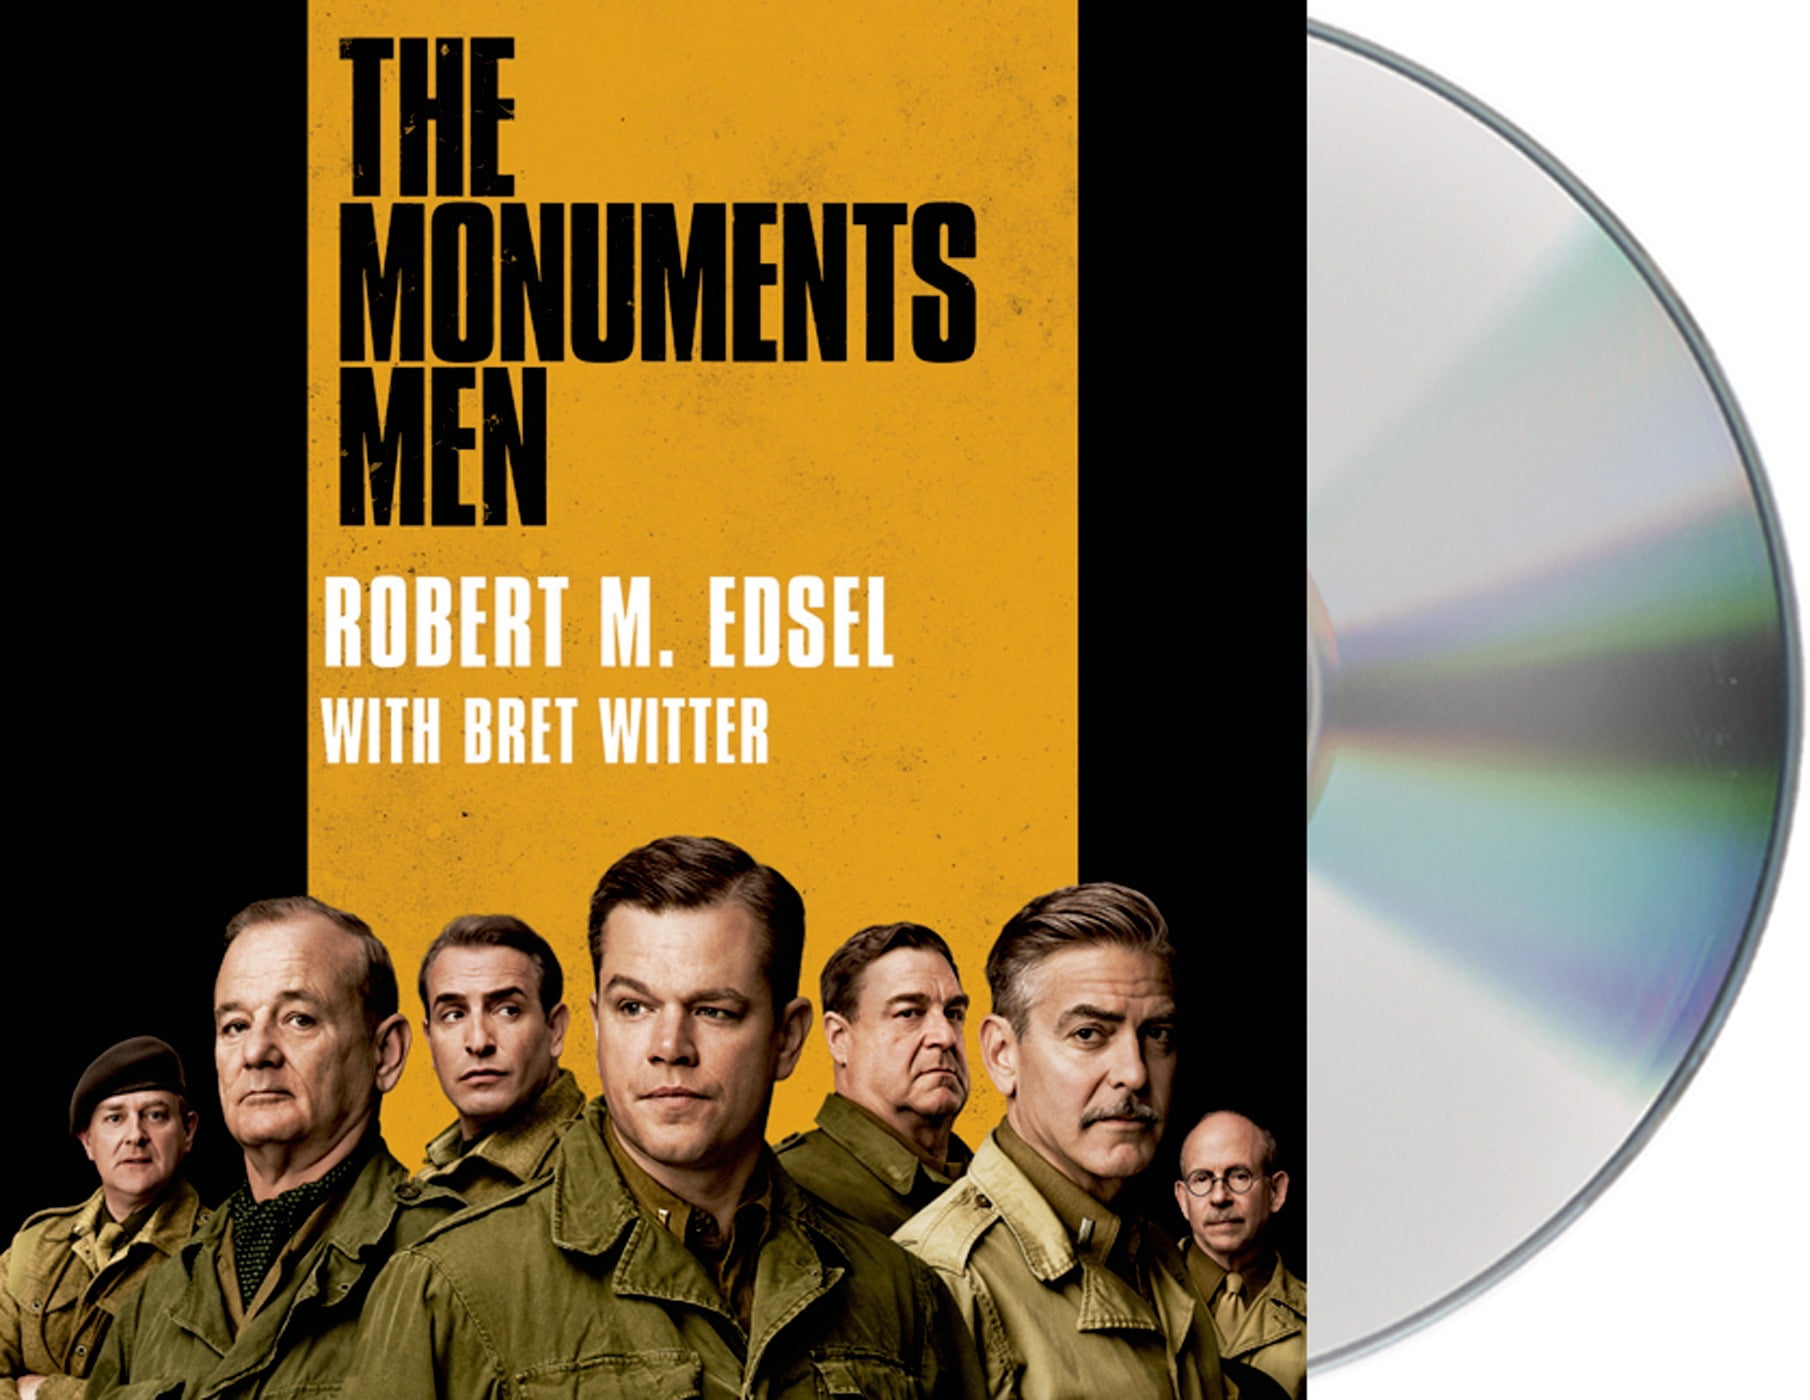 Allied Heroes Nazi Thieves and the Greatest Treasure Hunt in History The Monuments Men